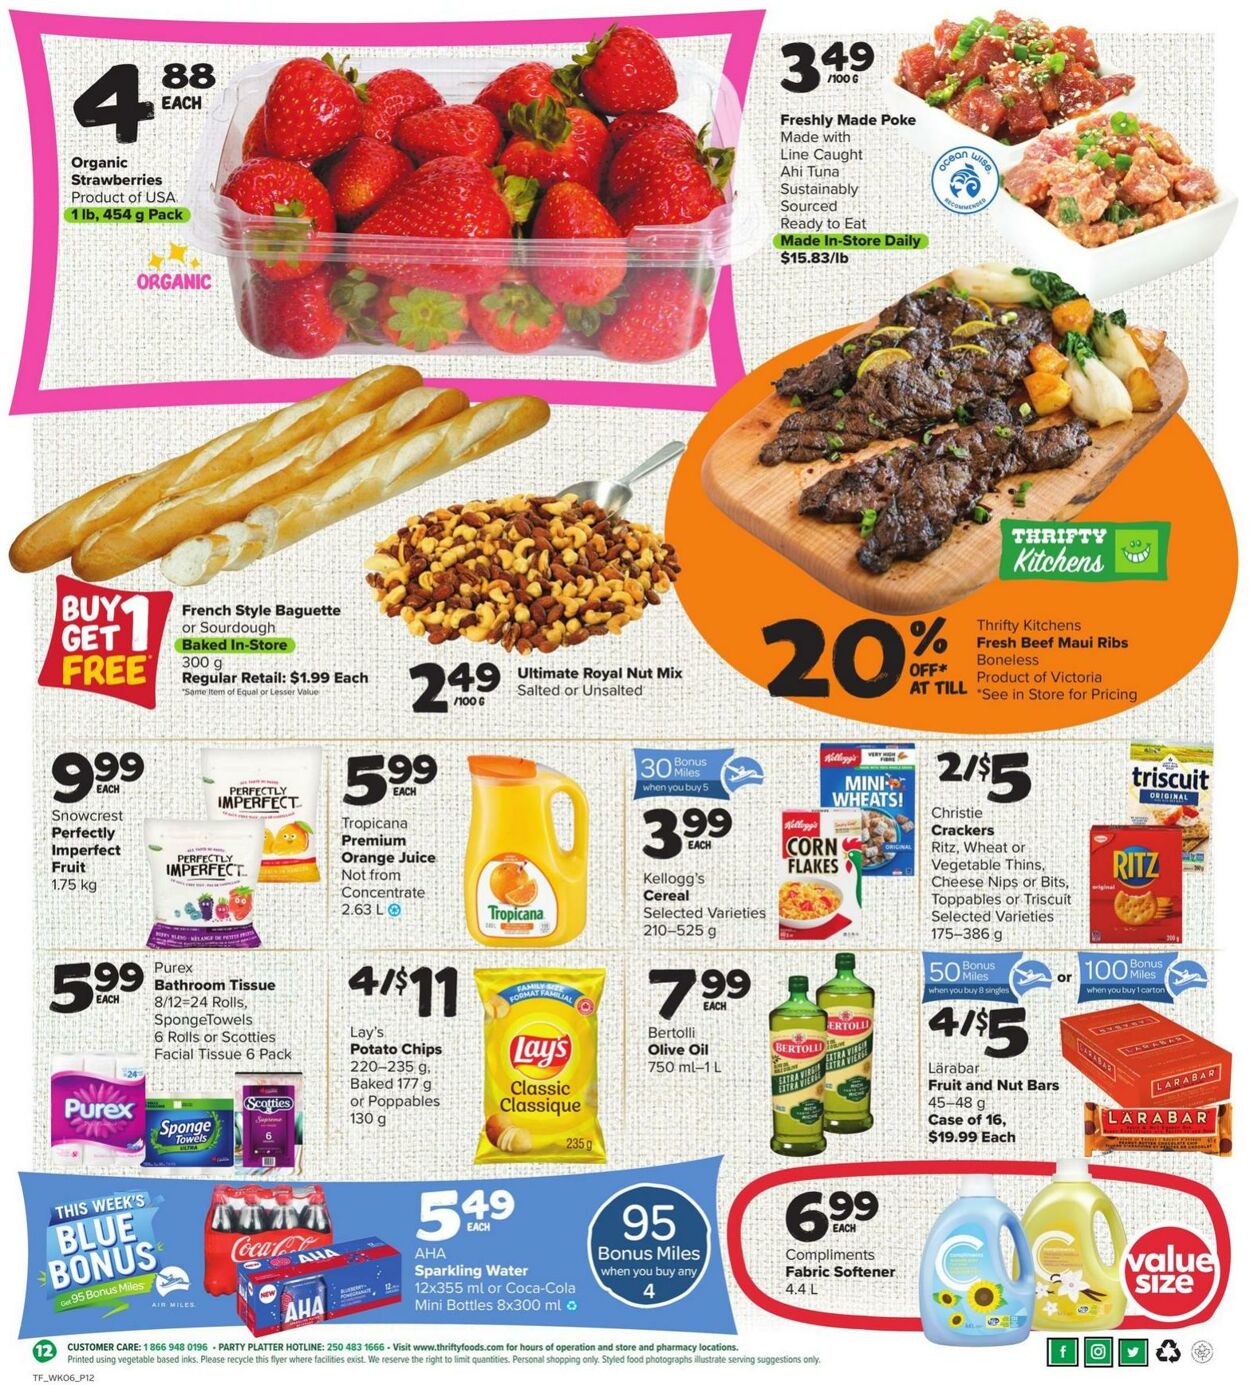 Circulaire Thrifty Foods 09.06.2022 - 15.06.2022